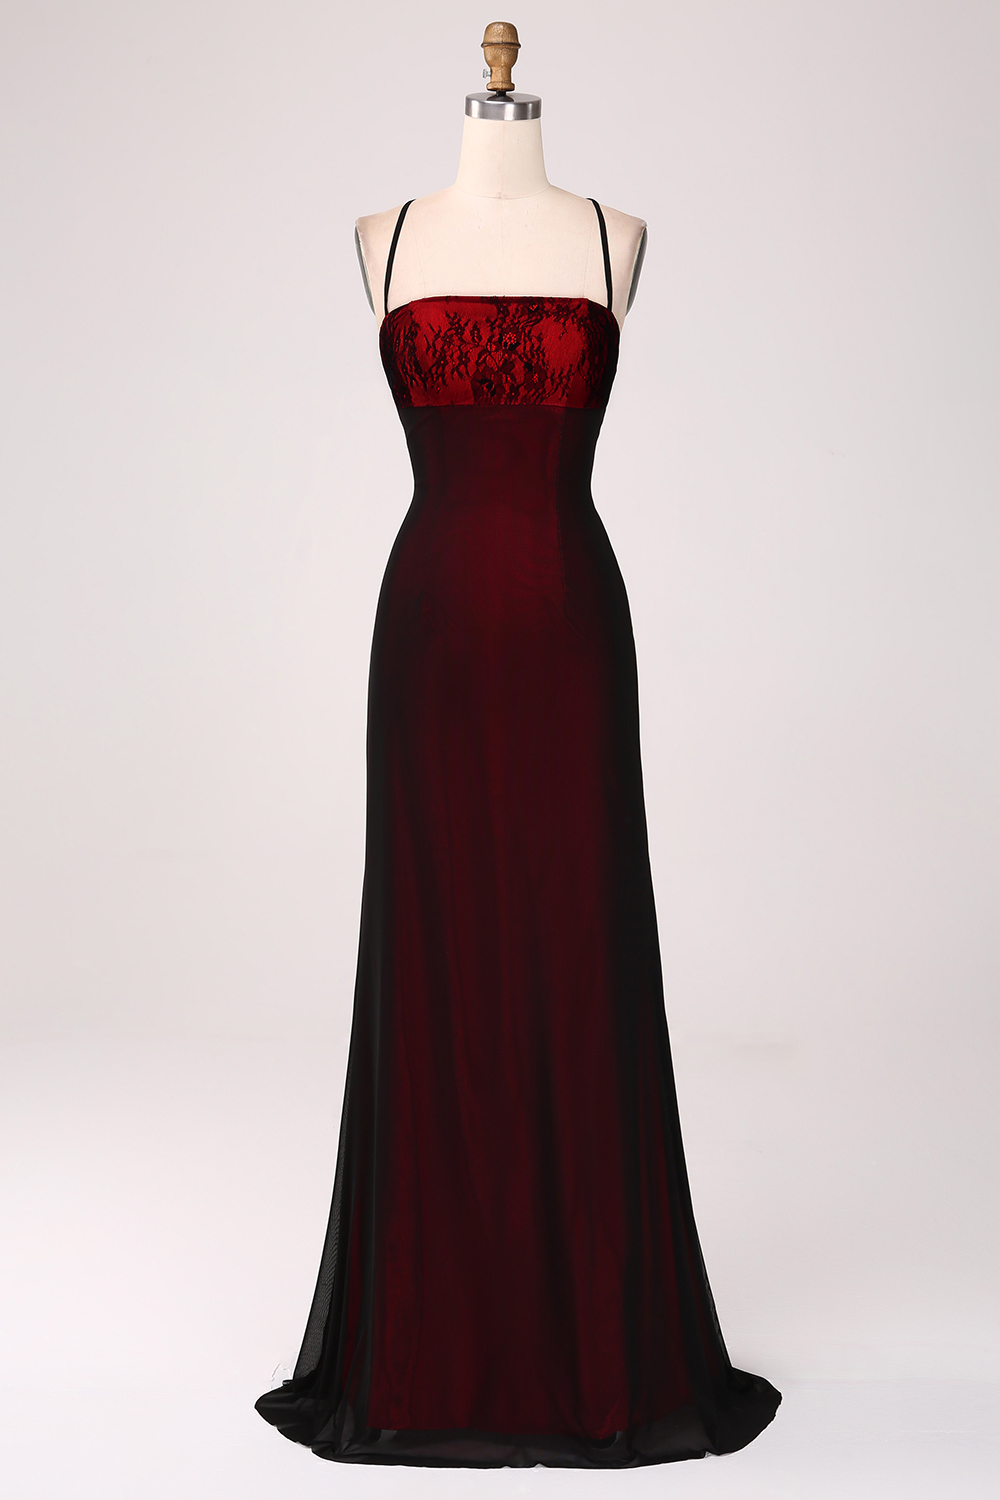 Black Red Spaghetti Straps Mermaid Long Bridesmaid Dress with Lace-up Back 